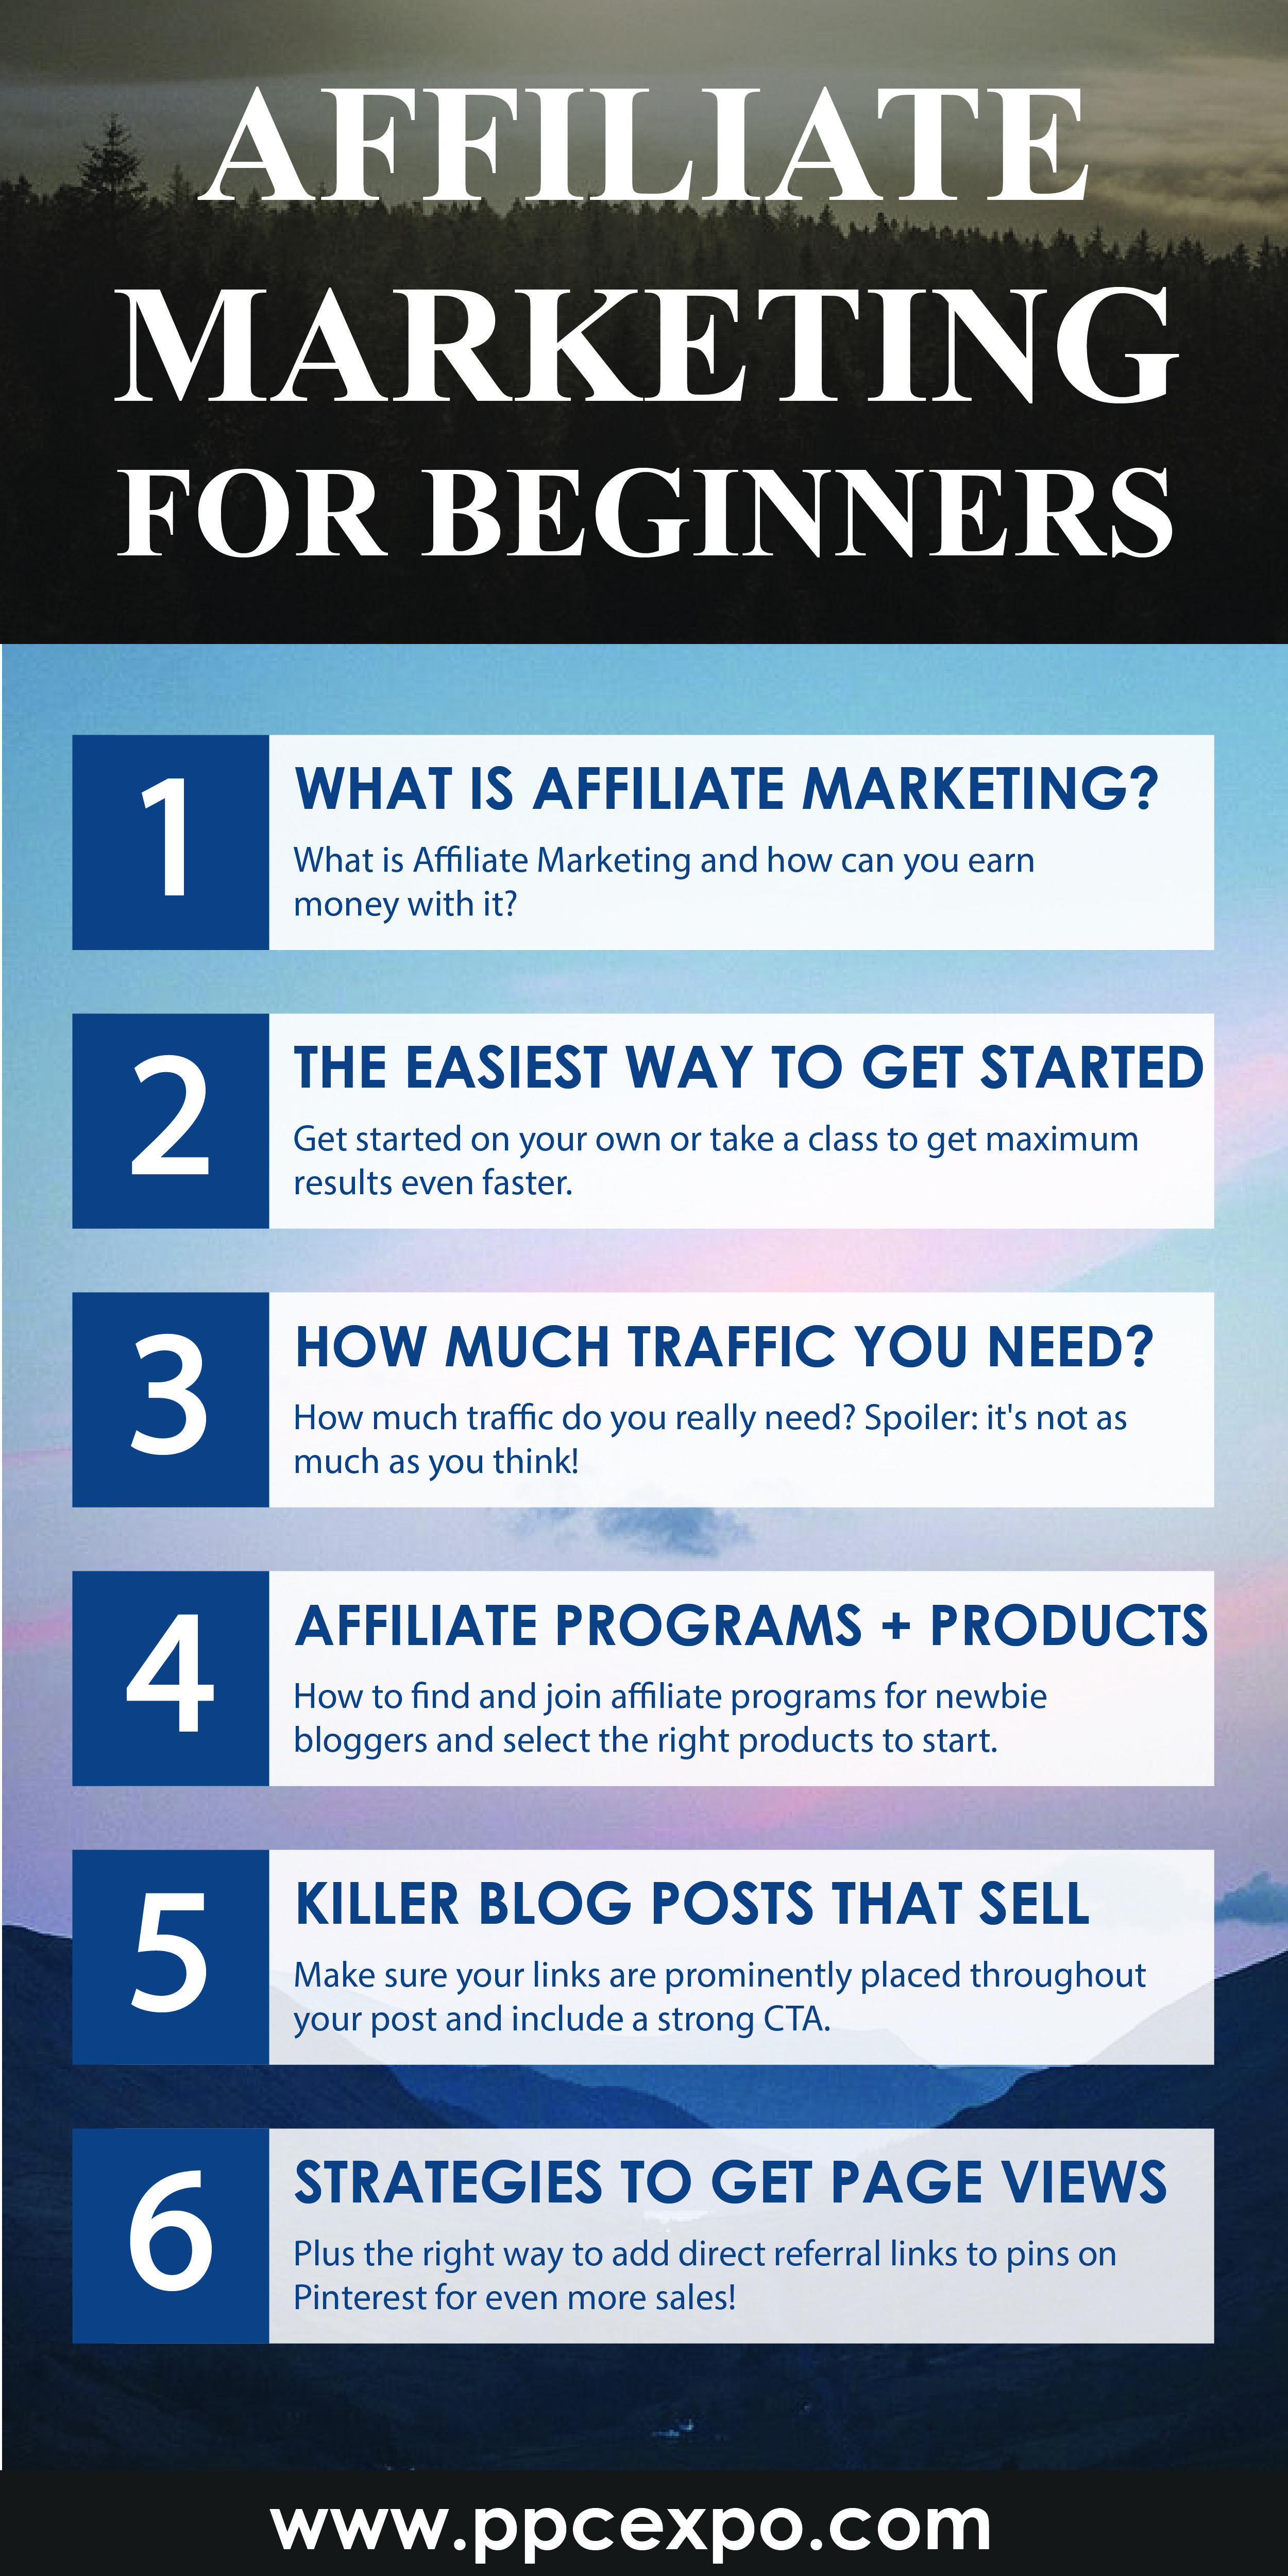 Affiliate Marketing for Beginners: How to Start Making Money in 2020